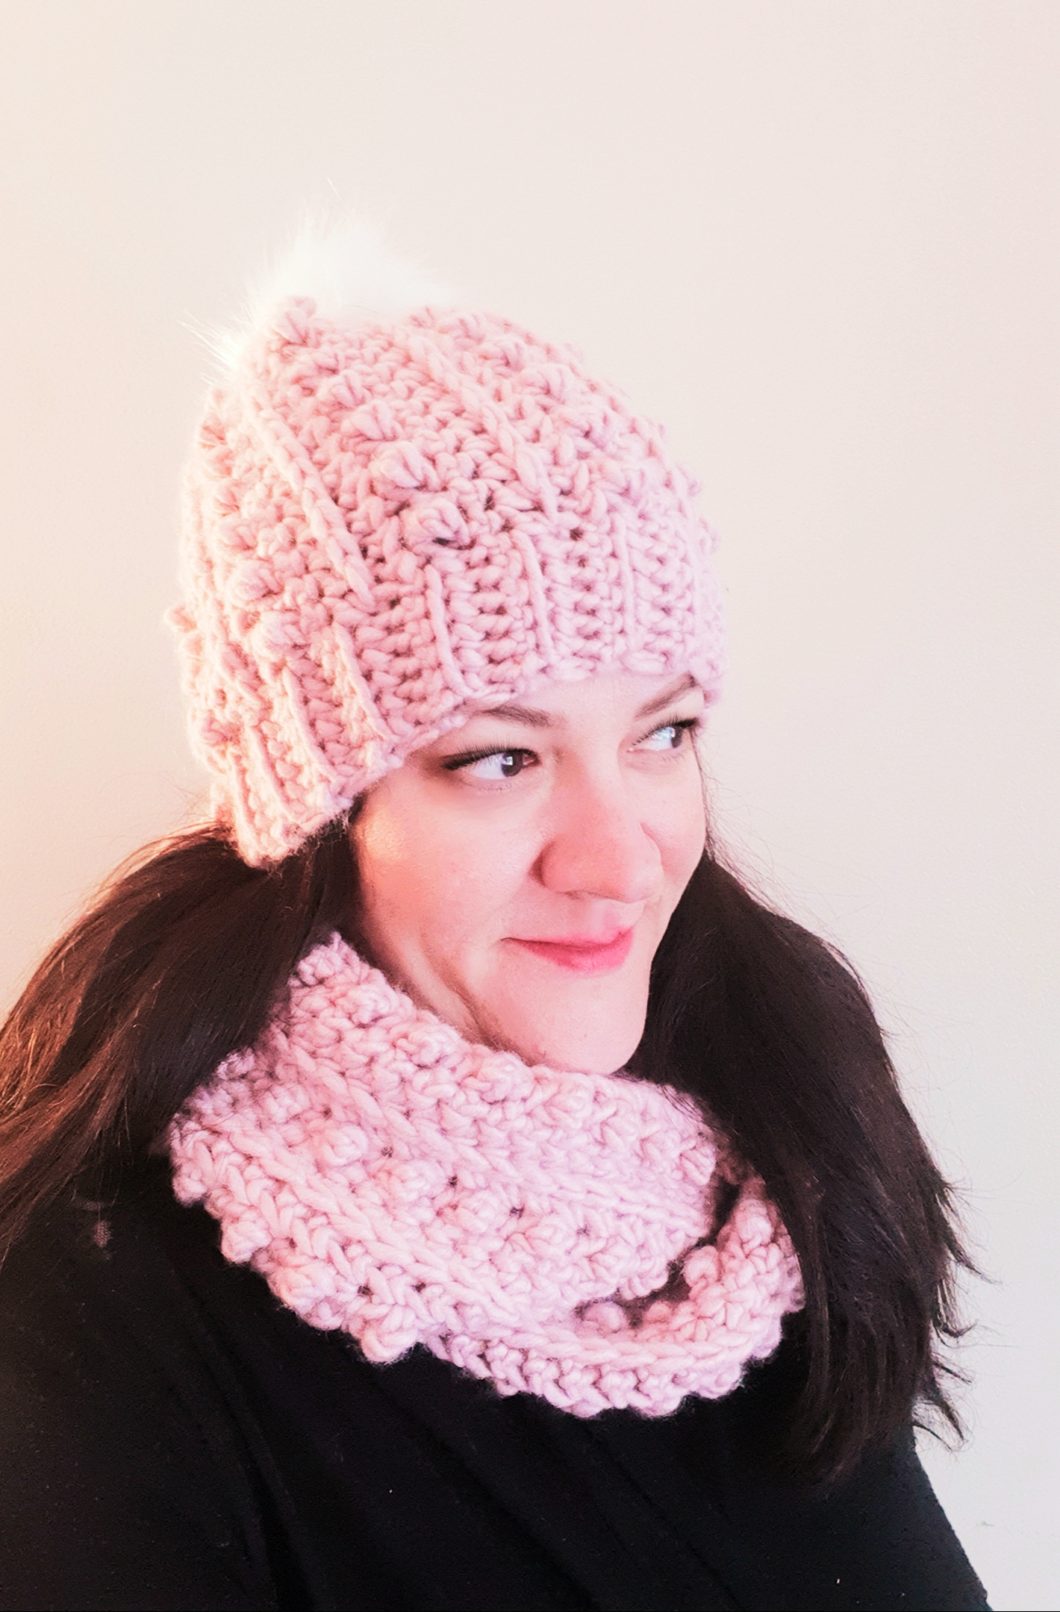 Crocheted Winter Hat with Pom Pom and Single Wrap Infinity Scarf Set